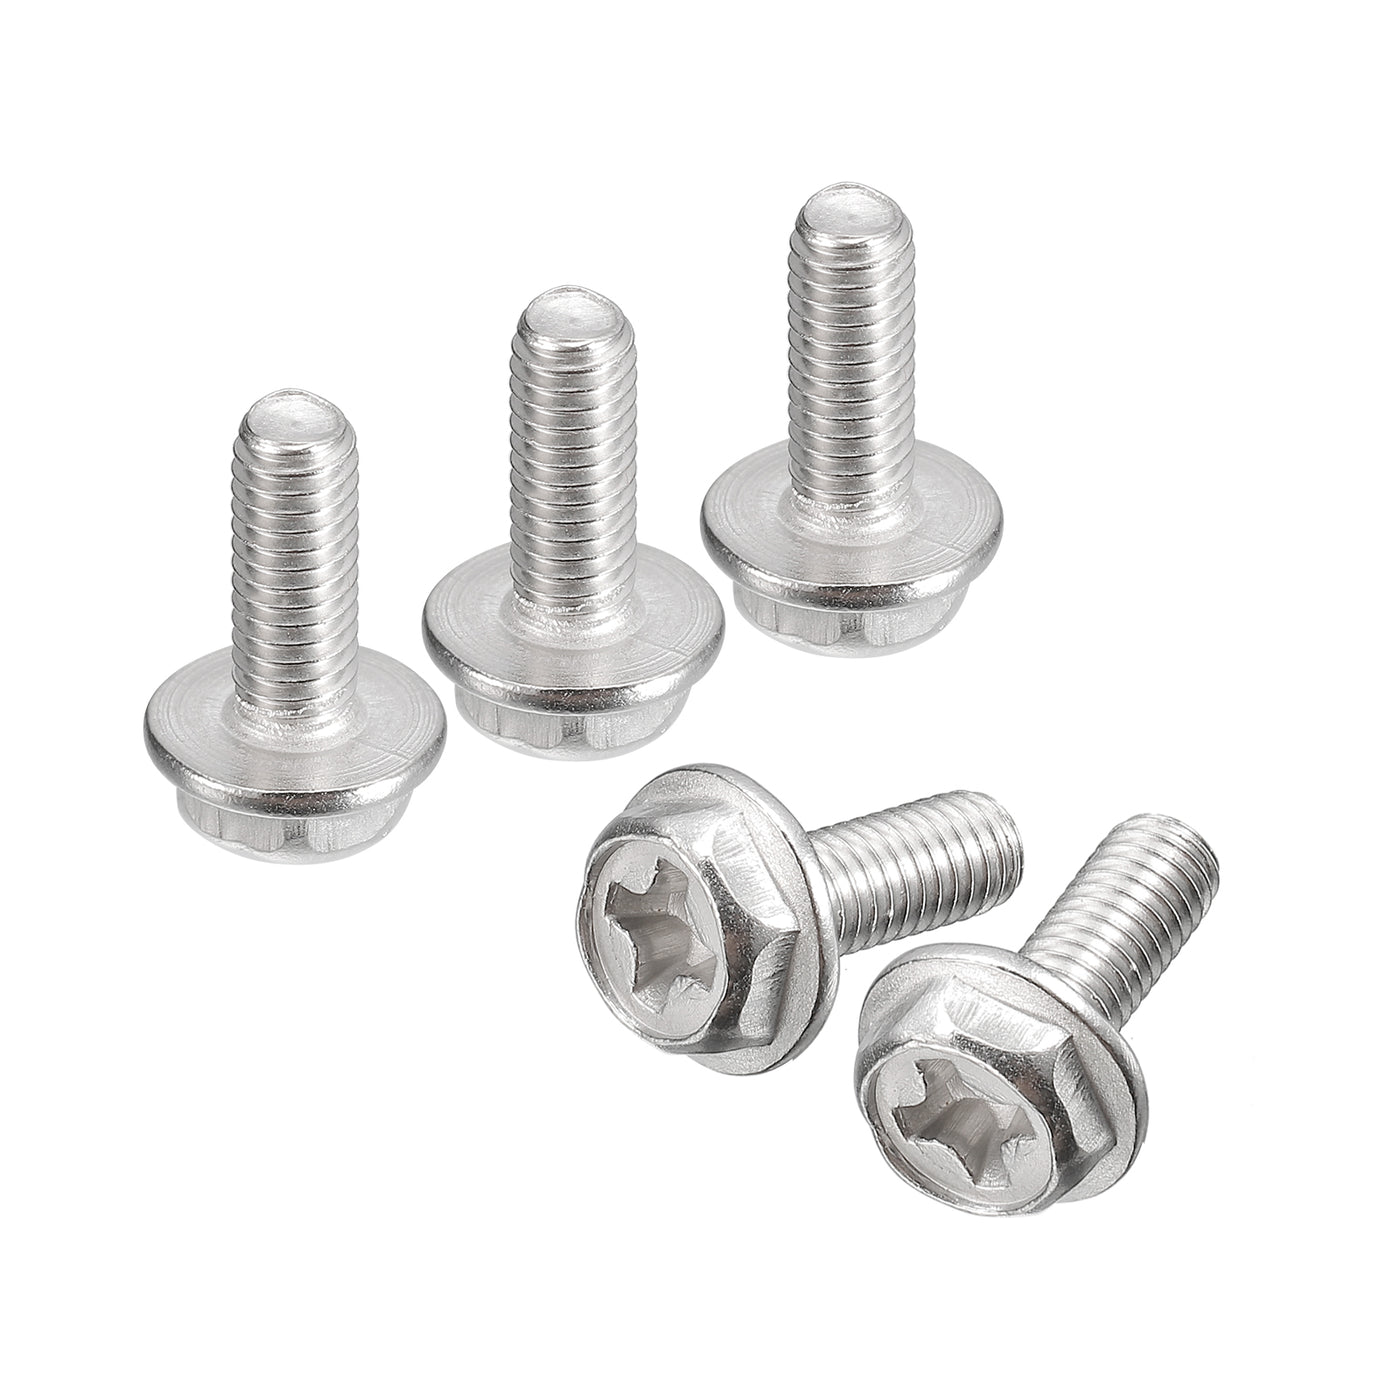 uxcell Uxcell Phillips Hex Head Flange Bolts, 304 Stainless Steel Hexagon Phillips Flange Hex Bolts Machine Screws